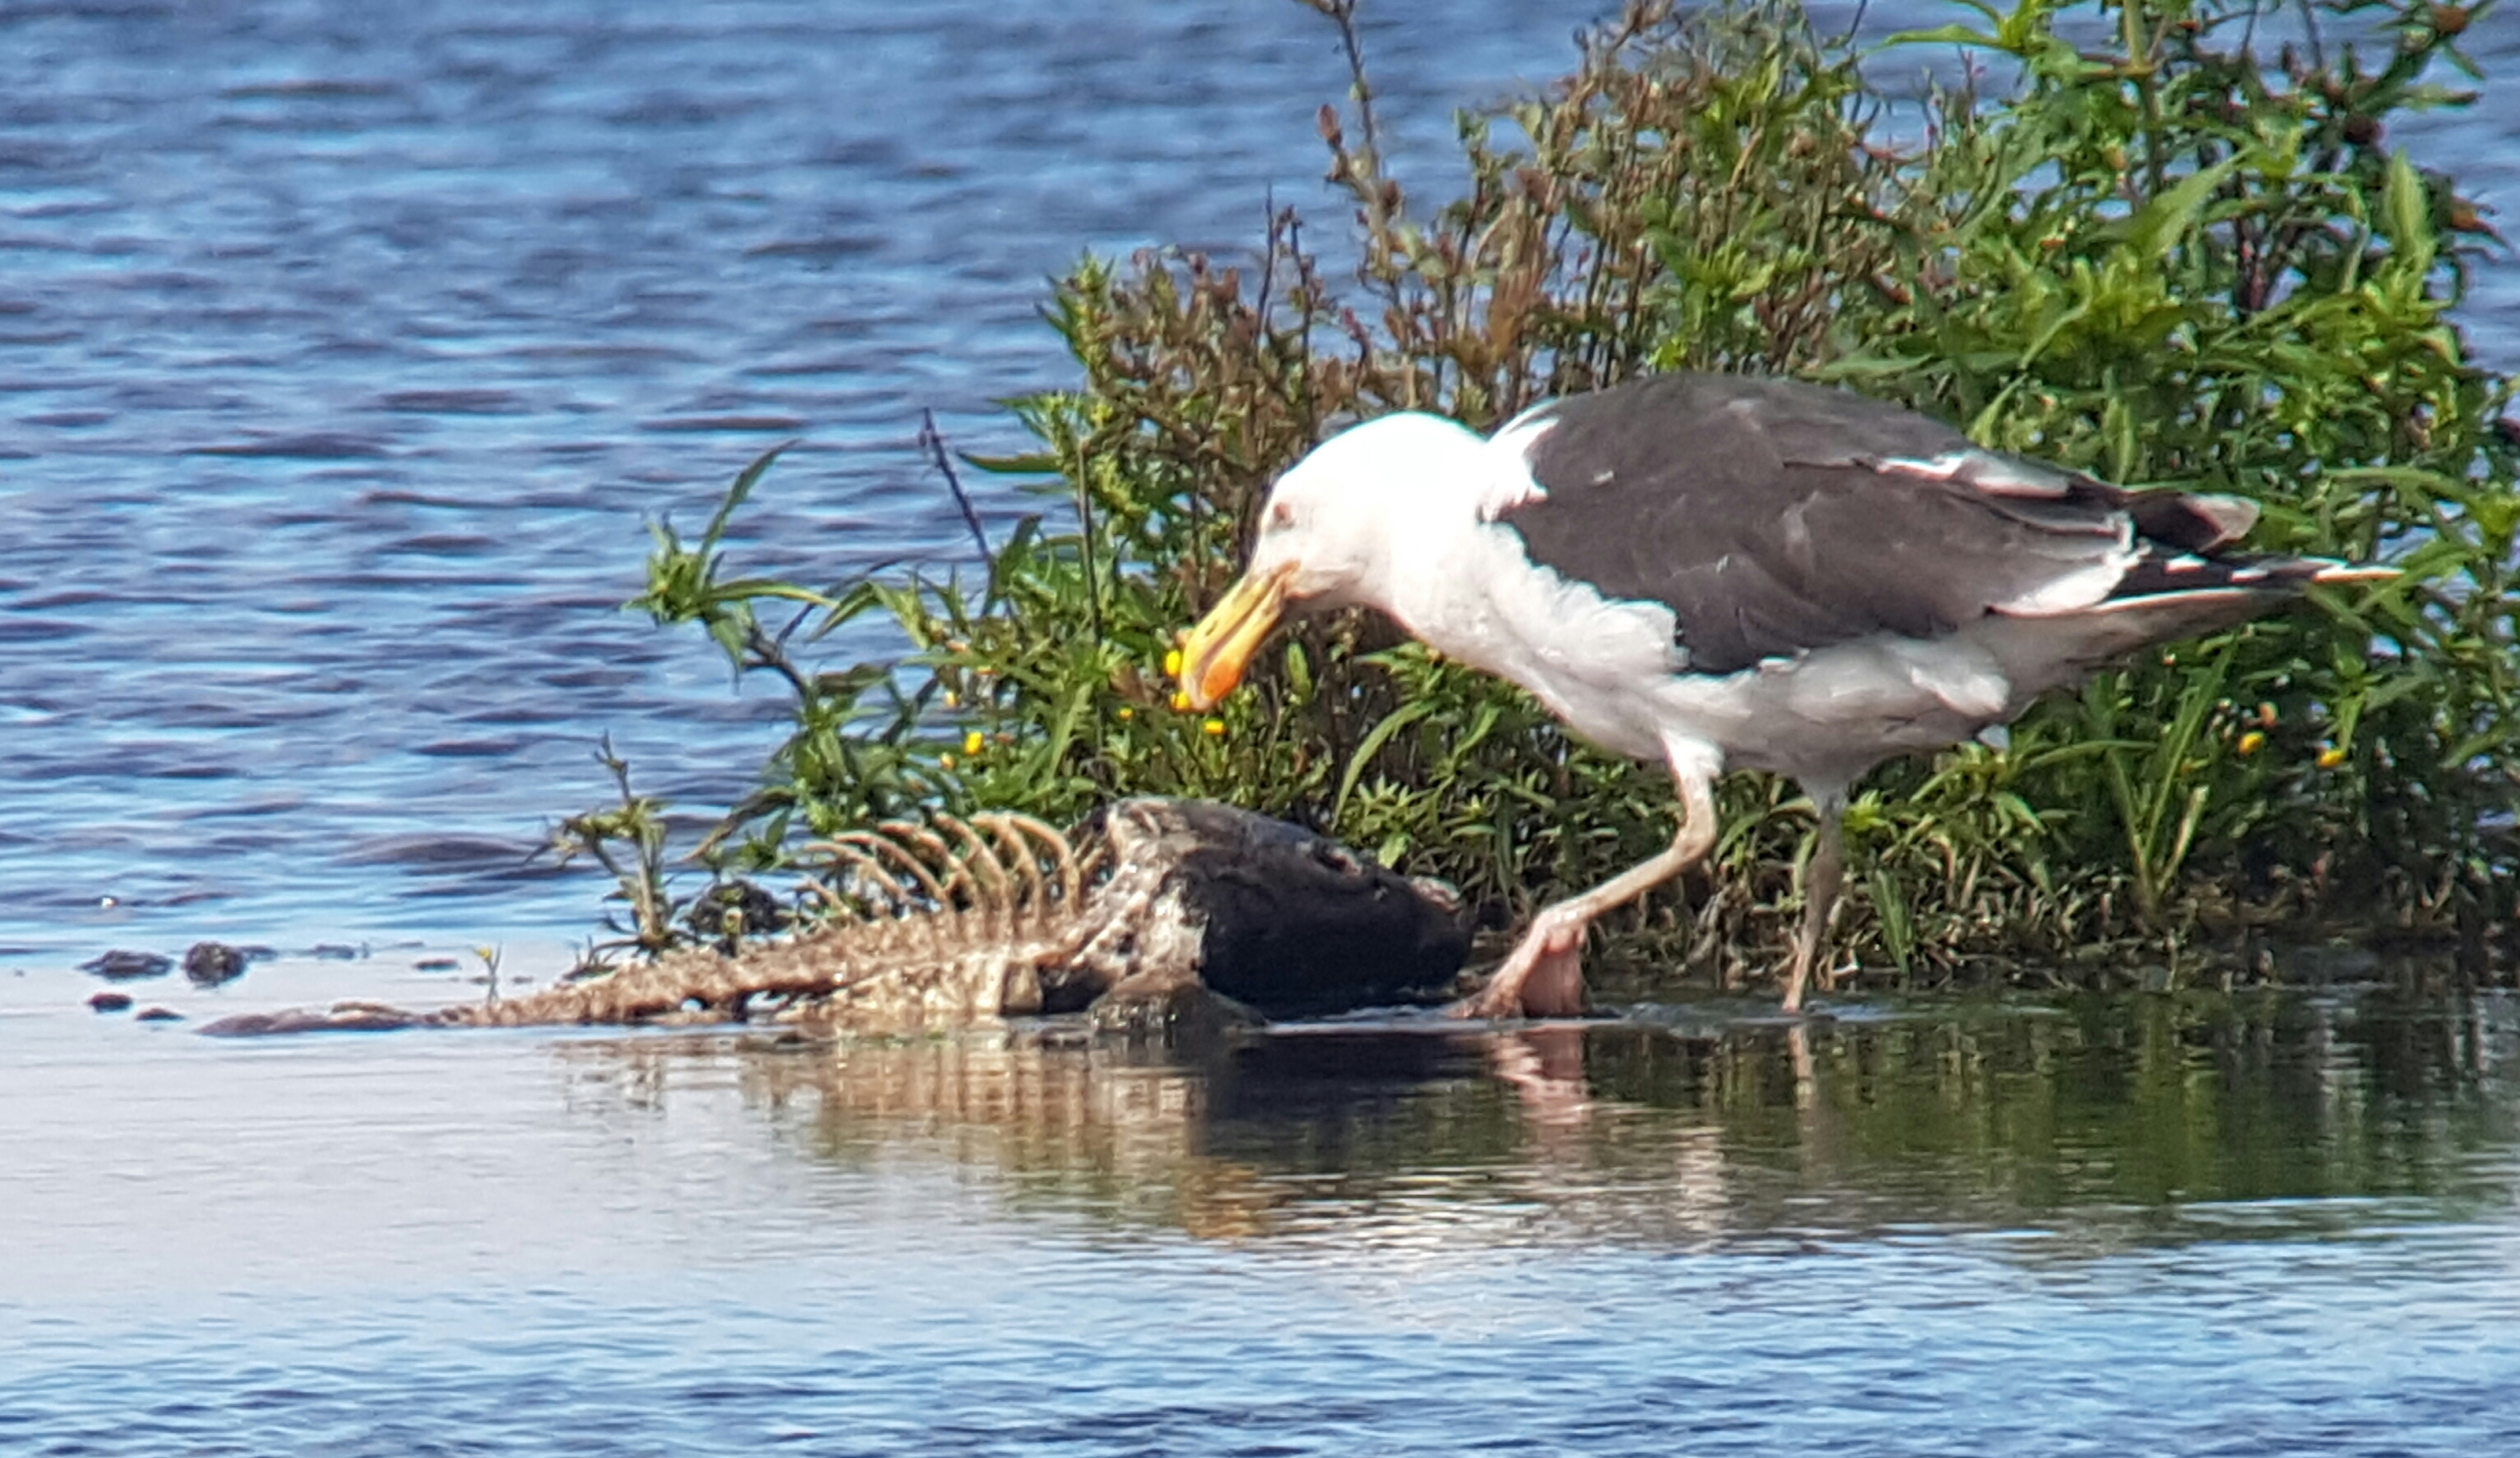 Great Black-backed Gull feeding on the corpse of a large Carp.